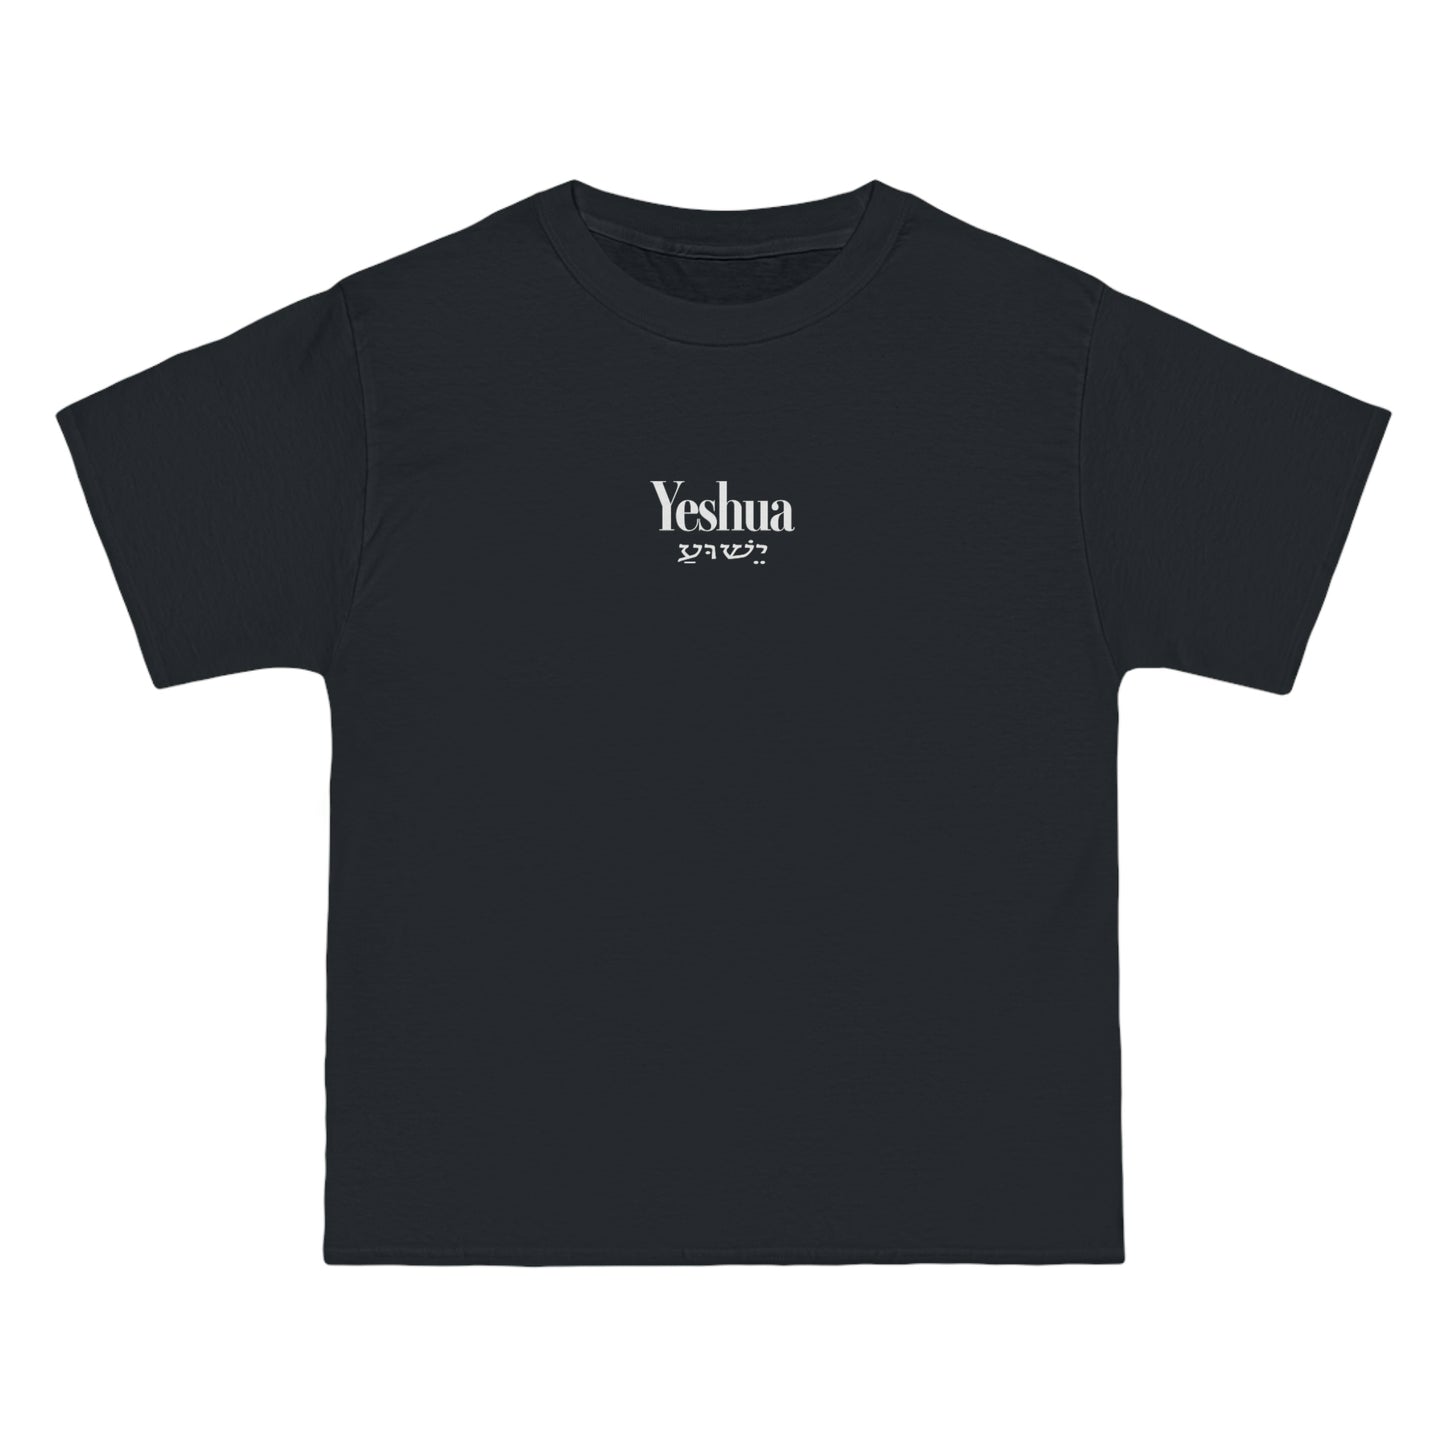 Yeshua with Hebrew Text - Black Oversized Tee